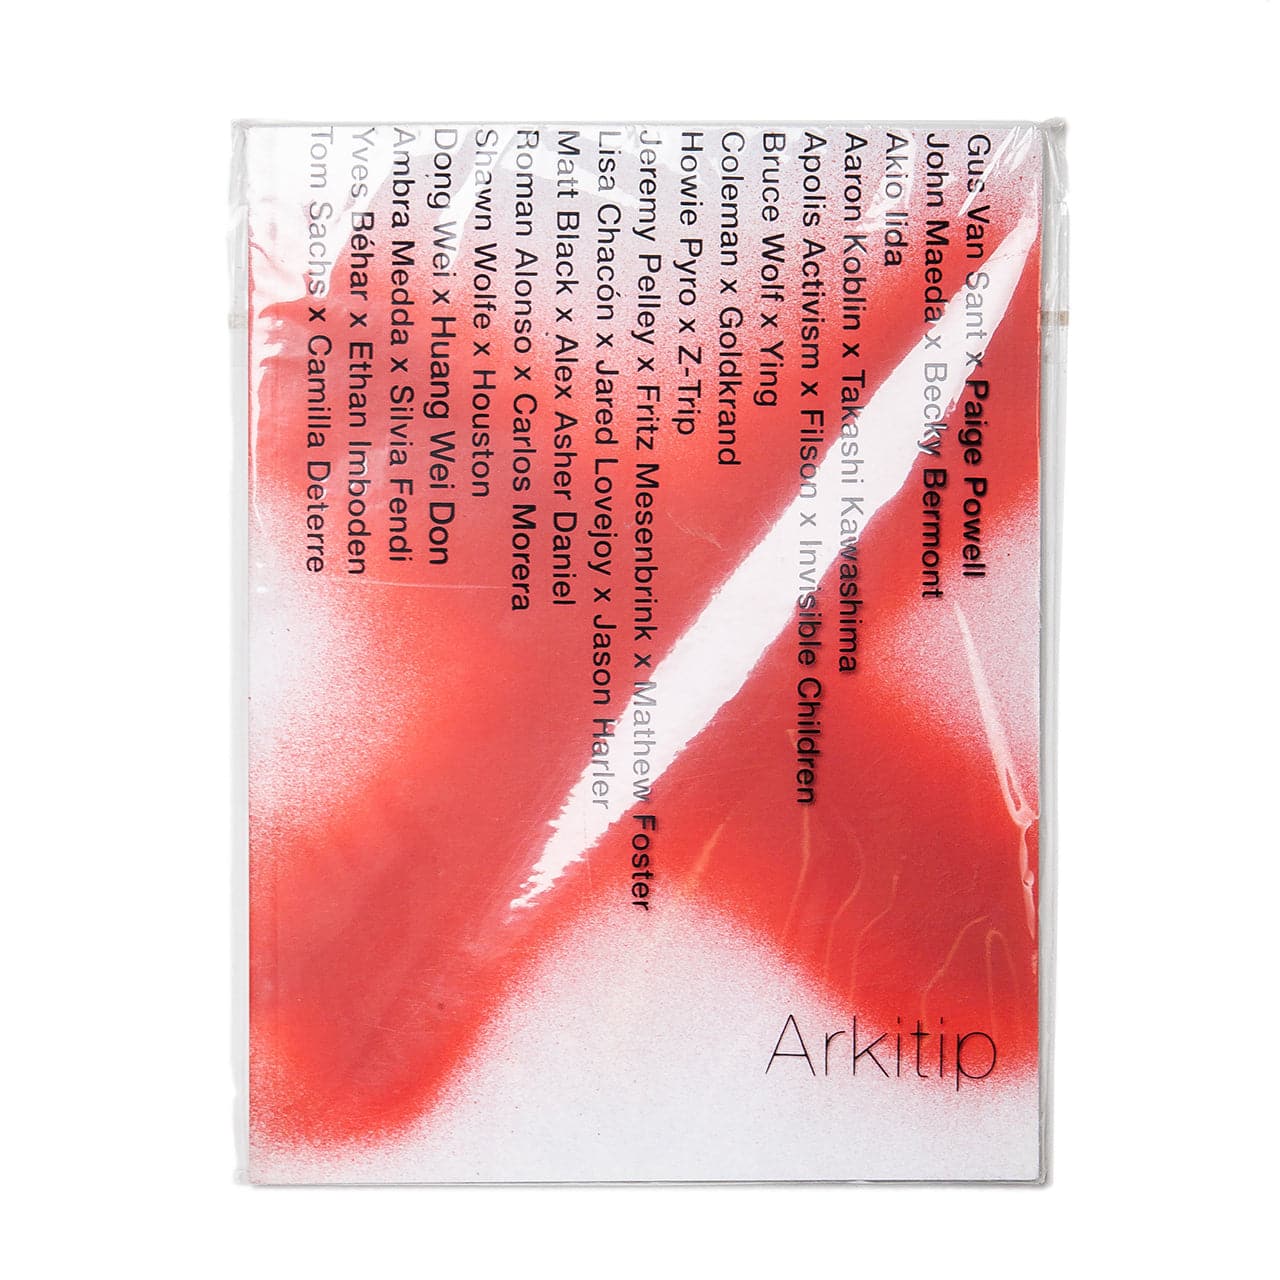 Arkitip Issue 0053 X: Mark of Collaboration  - Allike Store